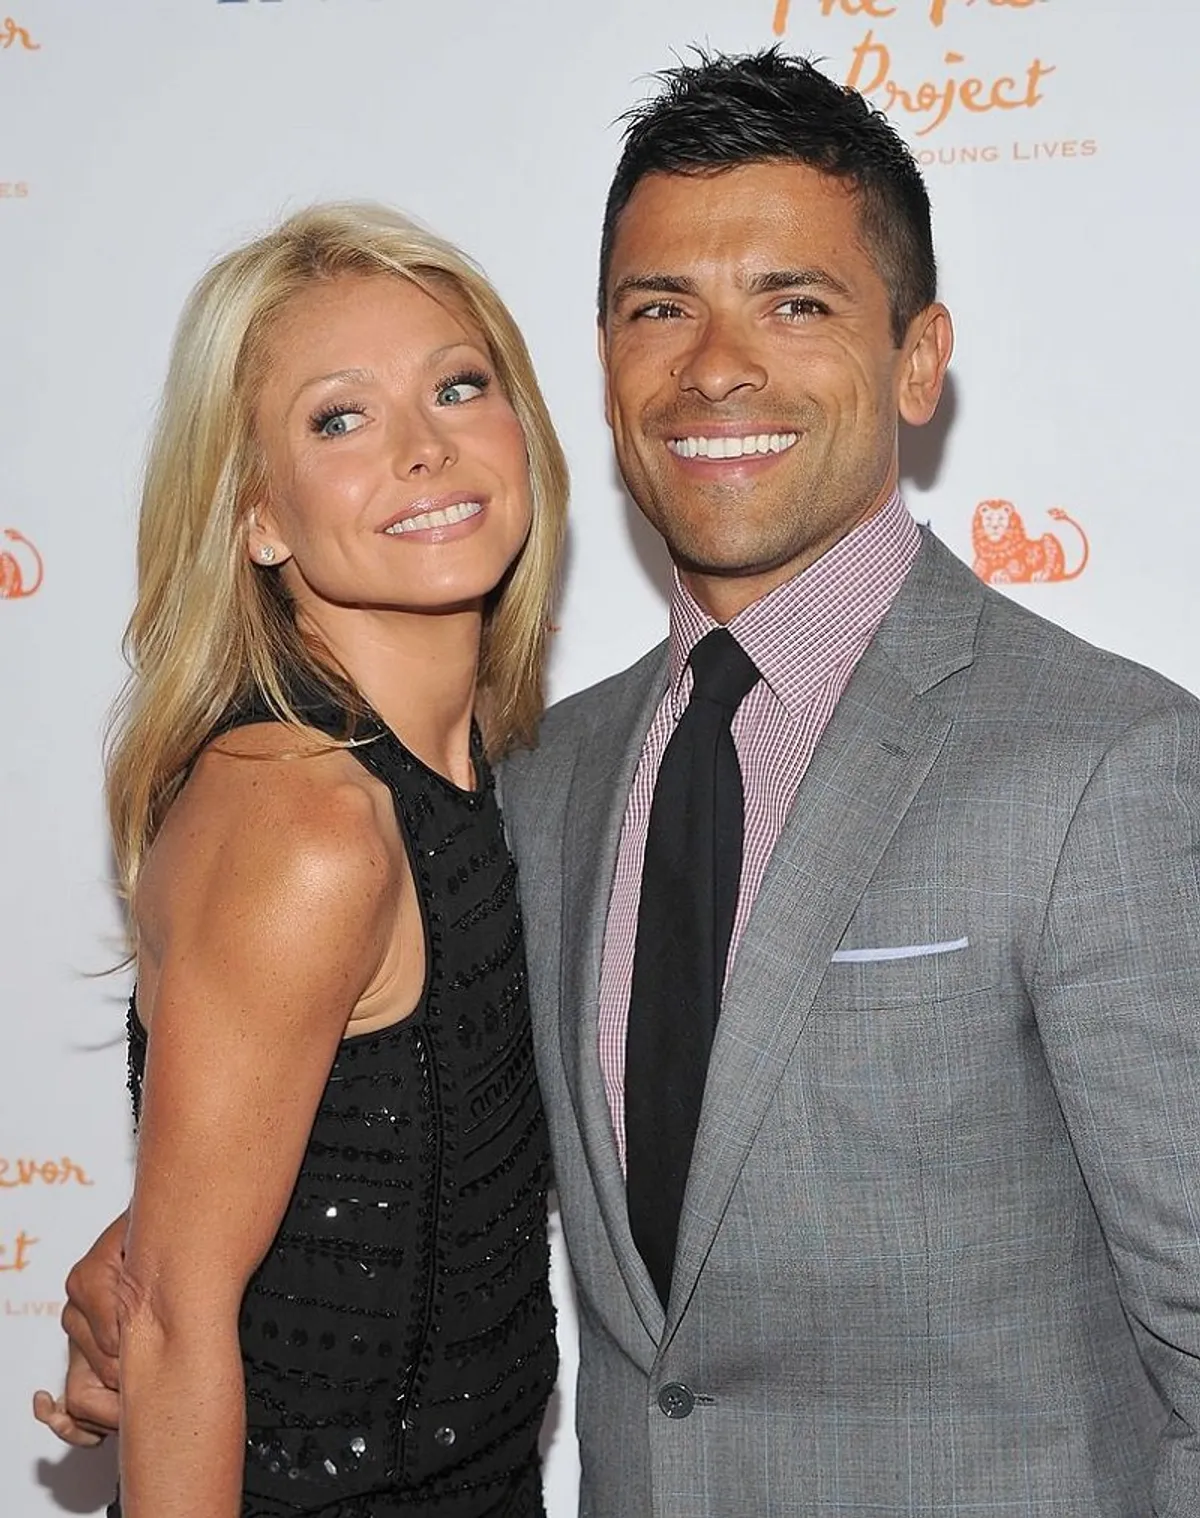 Kelly Ripa and Mark Consuelos attending Trevor Live: An Evening Benefiting the Trevor Project n New York City in June 2011. | Photo: Getty Images